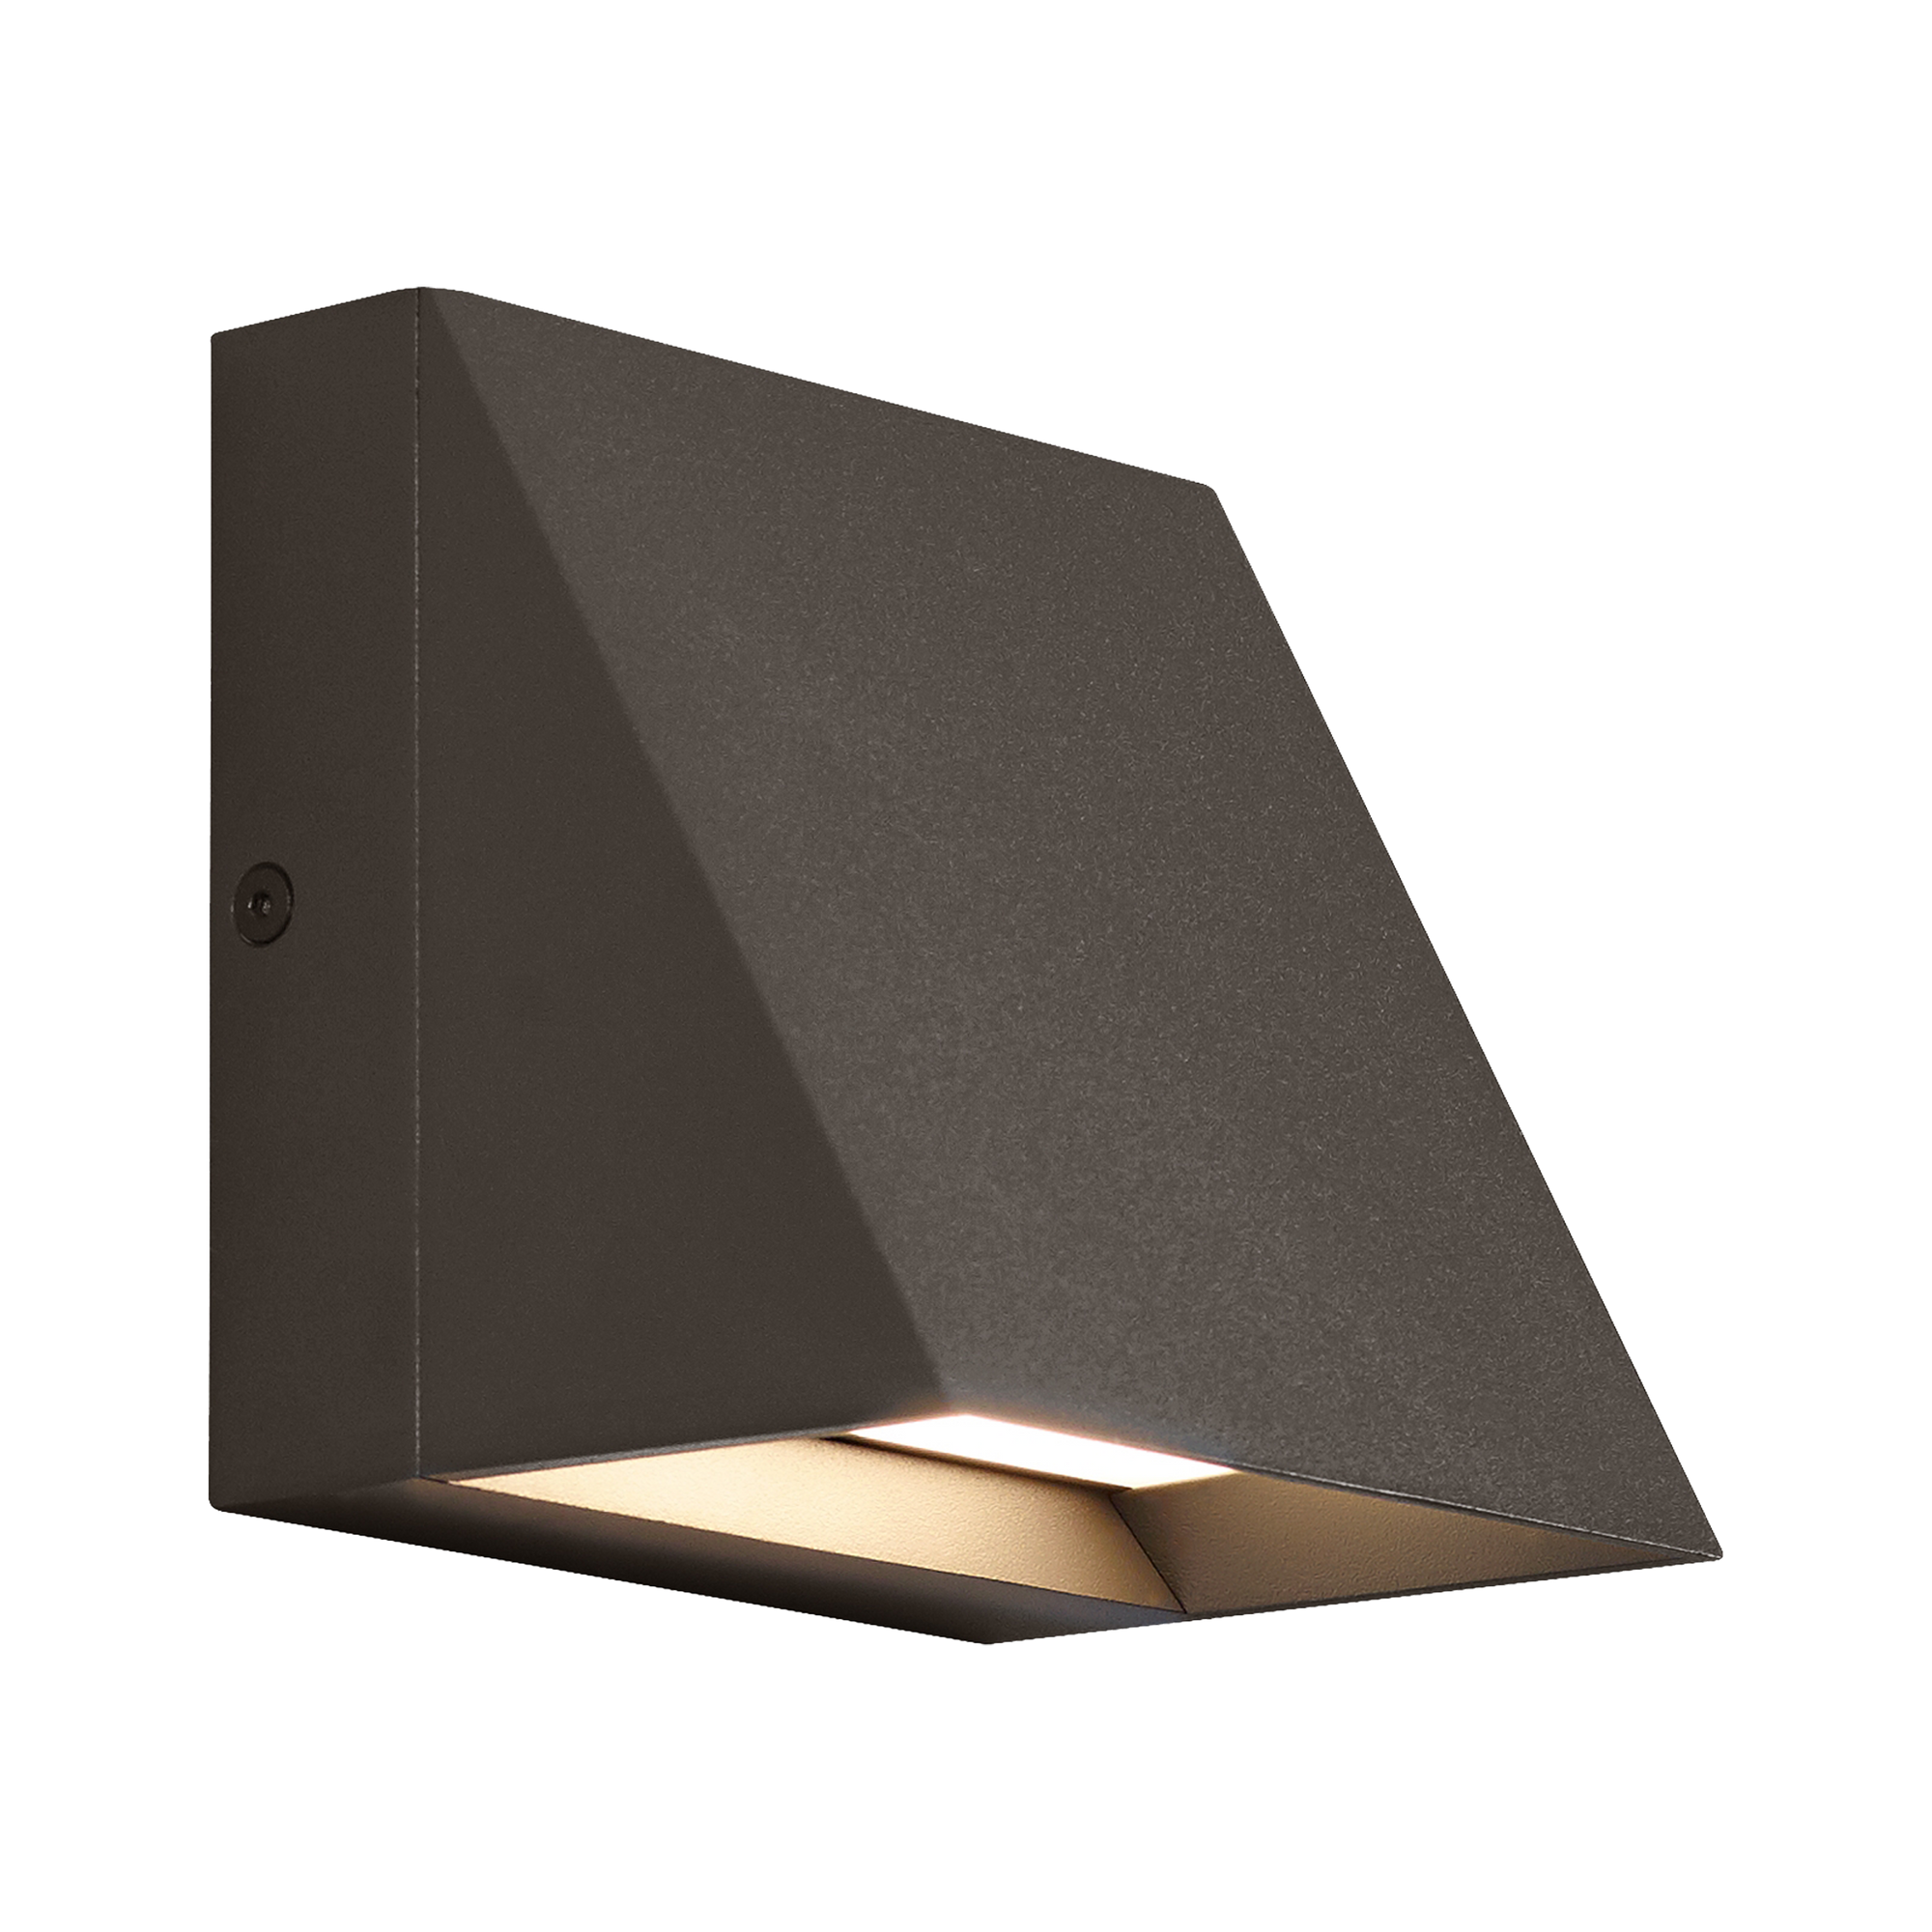 An architectural profile reminiscent of beautifully classic roof lines delivers significant light output in the Grove LED wall sconce which is suitable for both indoor and outdoor 